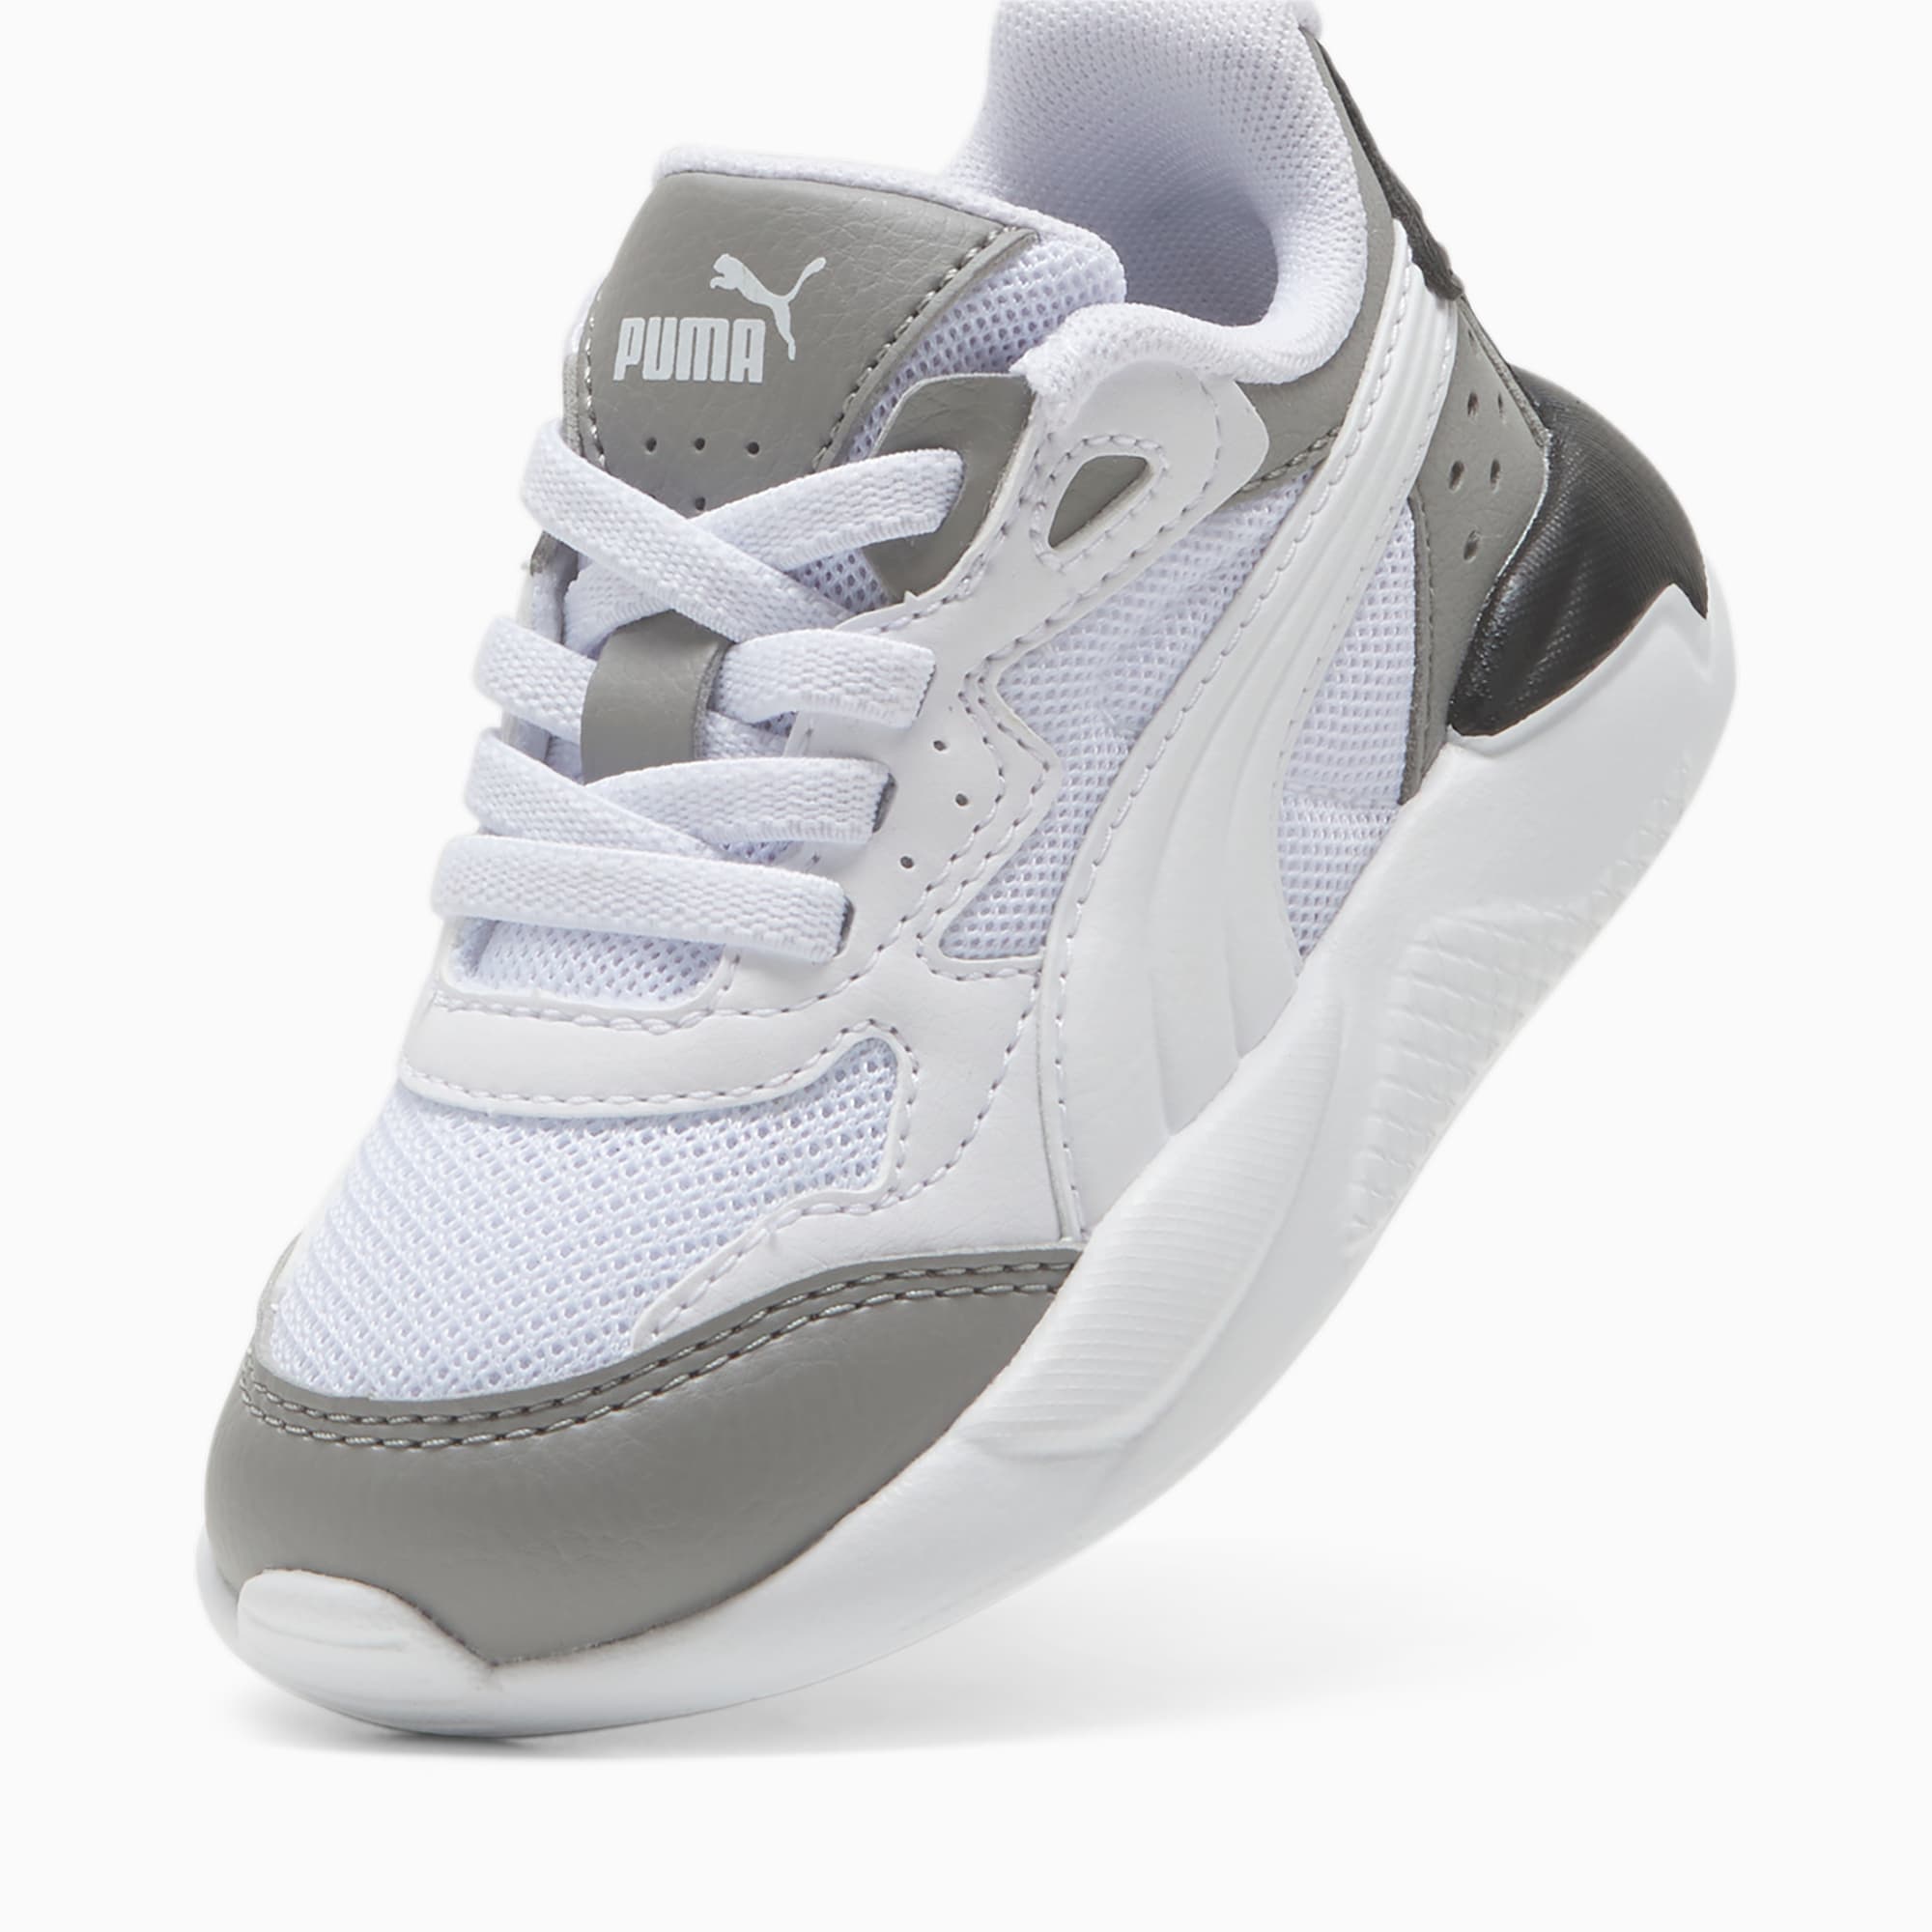 PUMA X-Ray Speed AC Babies' Trainers, Stormy Slate/White/Black, Size 19, Shoes